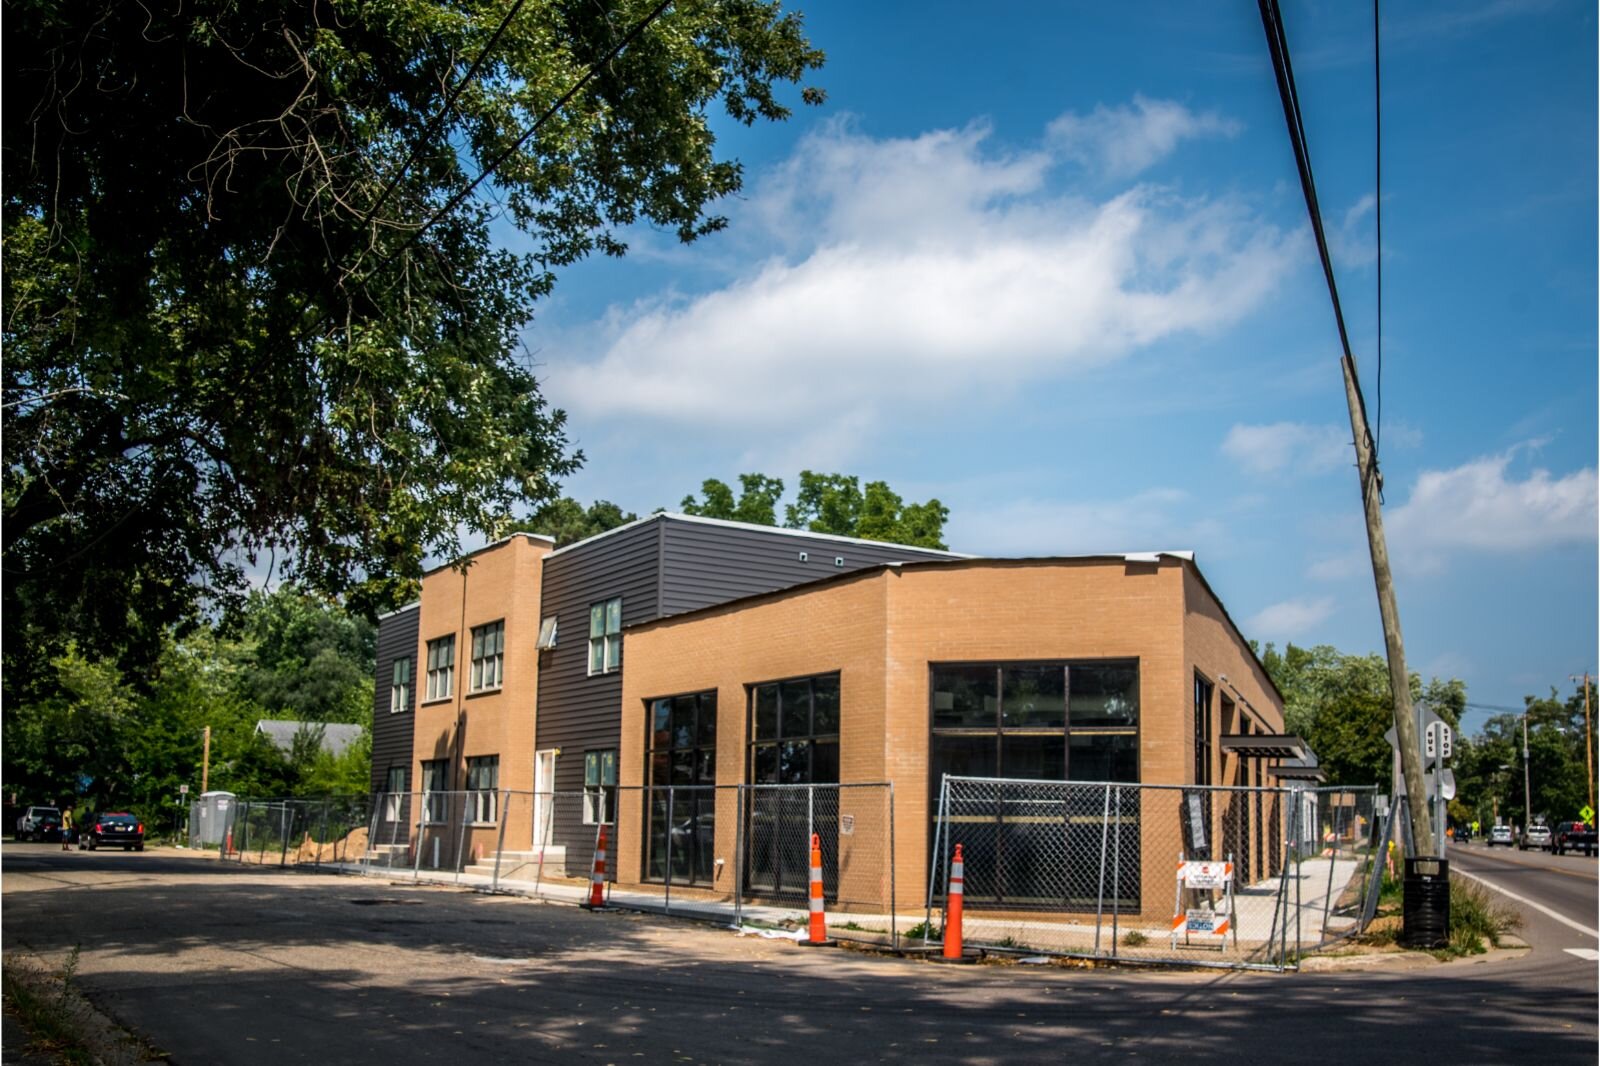 The 1601 East Main St. condominium project will feature six condominiums and commercial space that may house more than one business or organization.